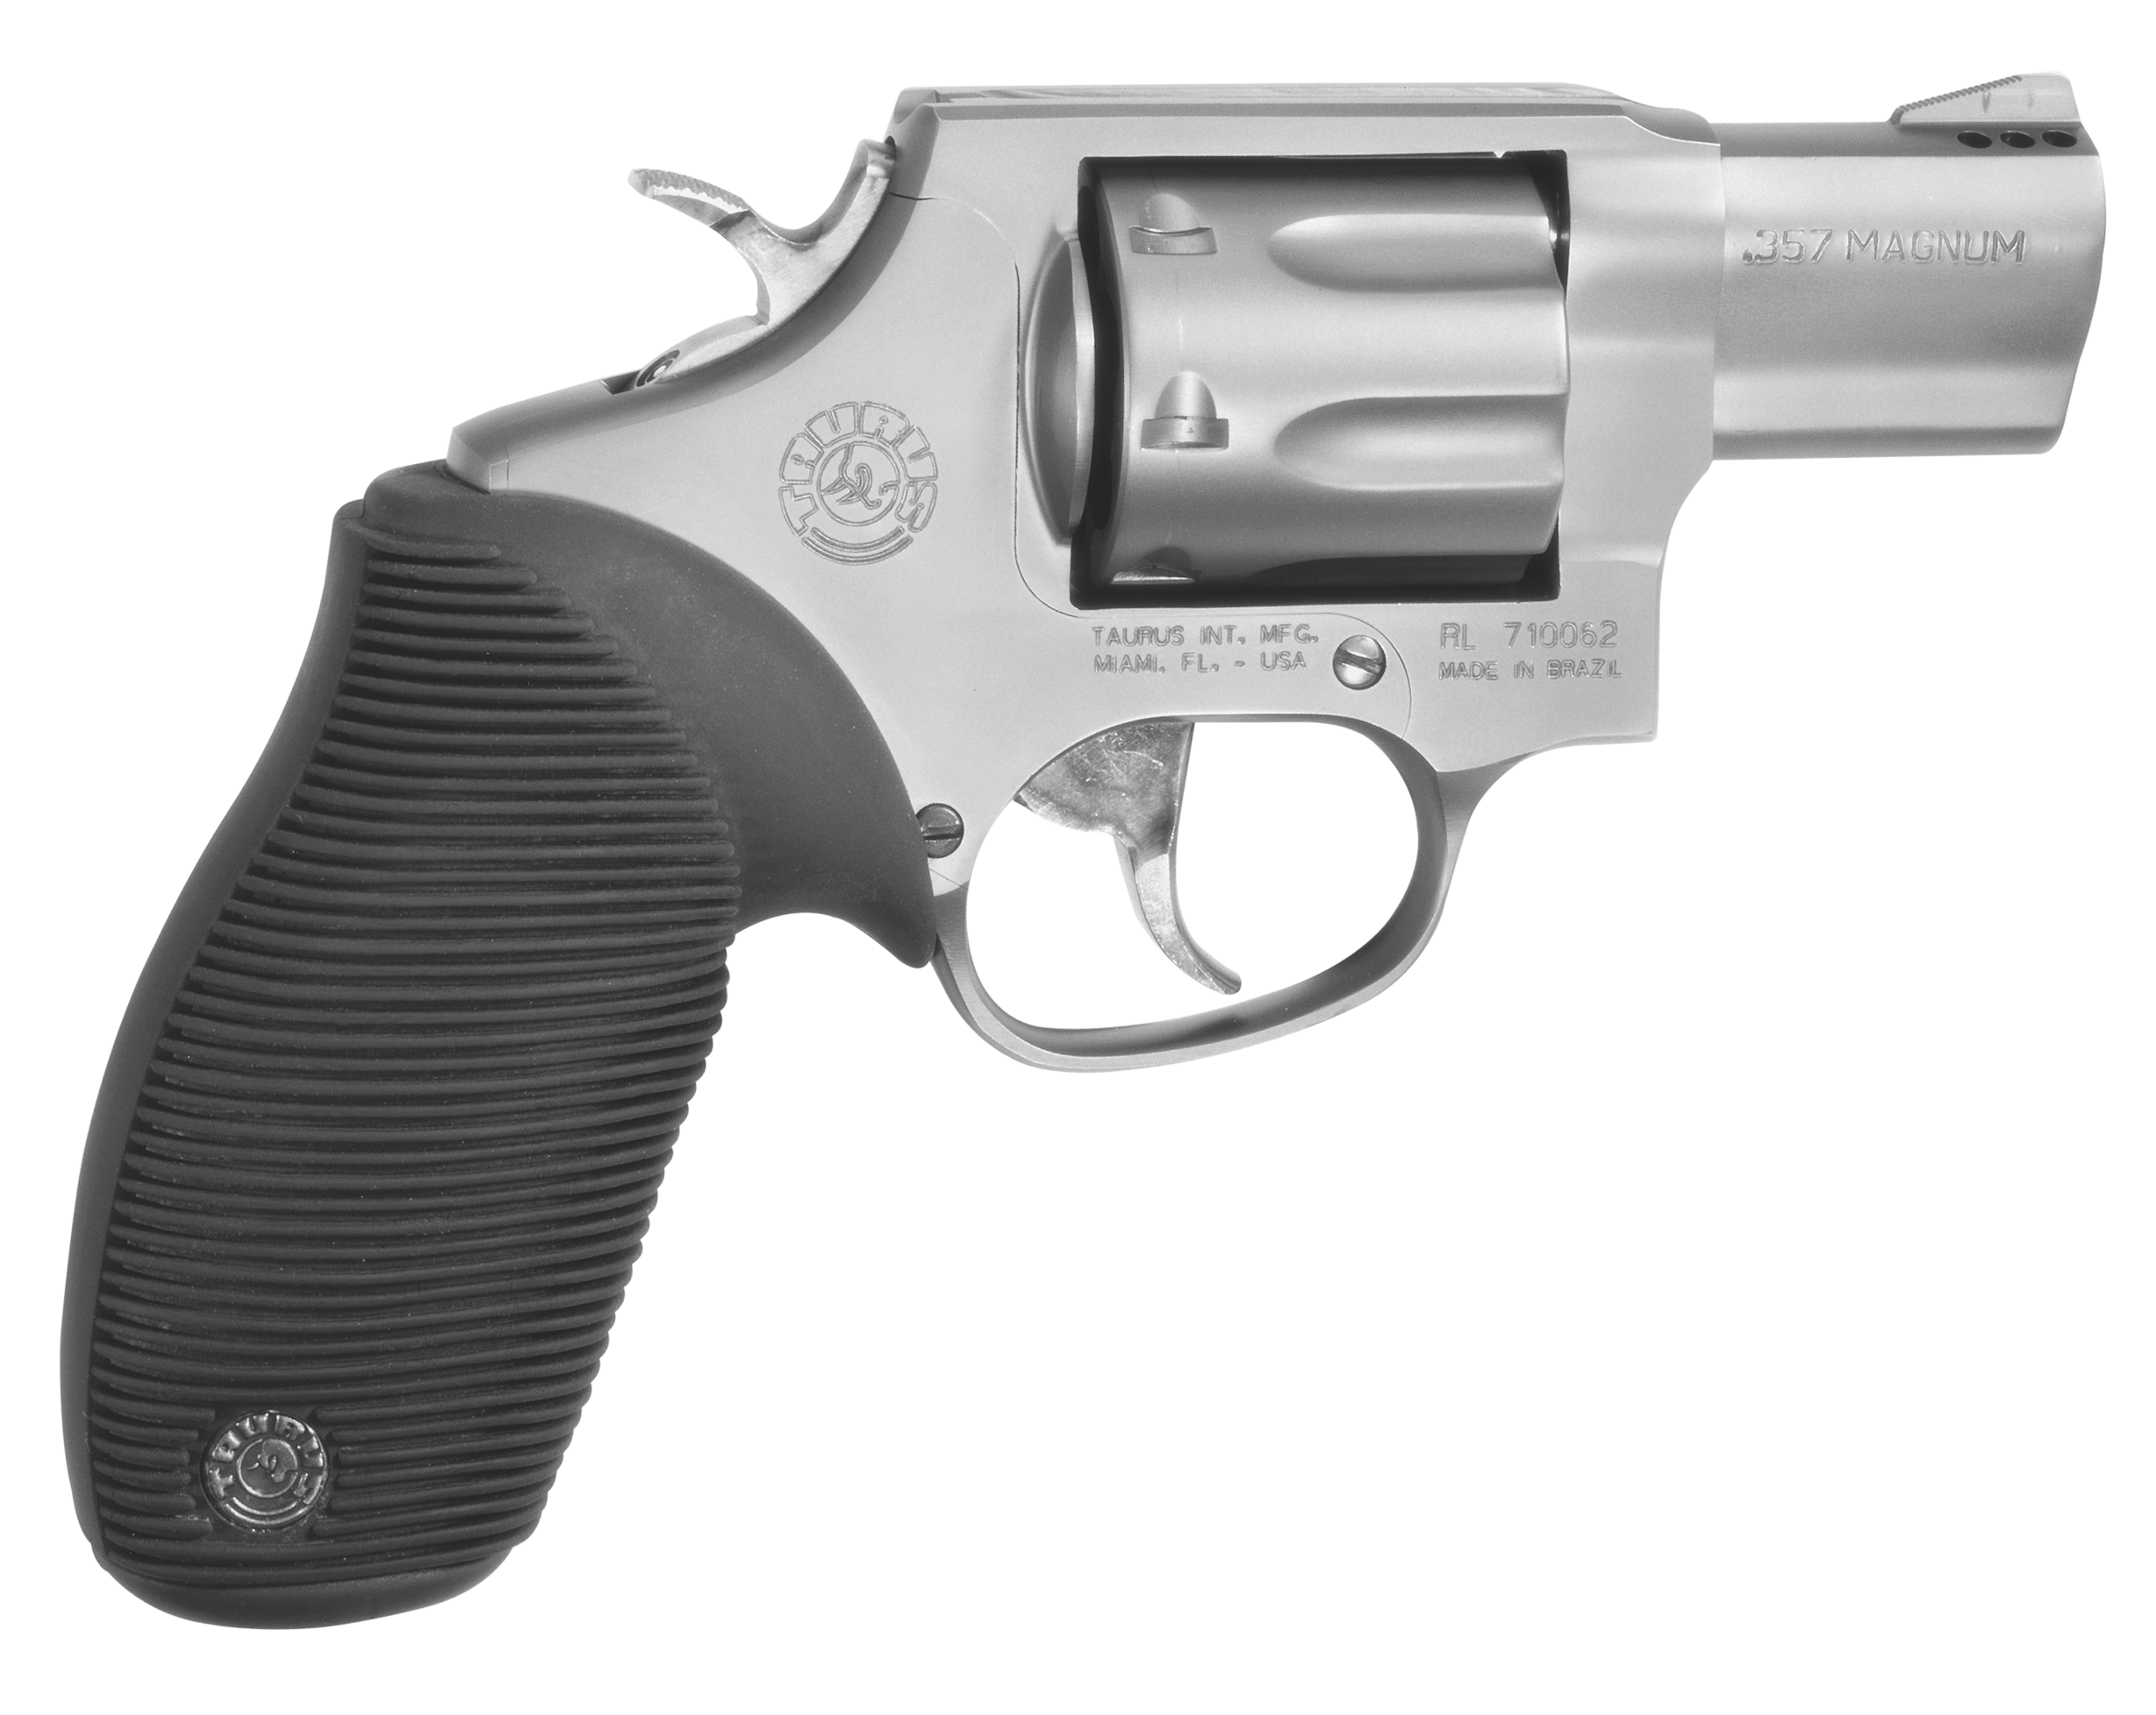 Chambered for .357 Magnum. 